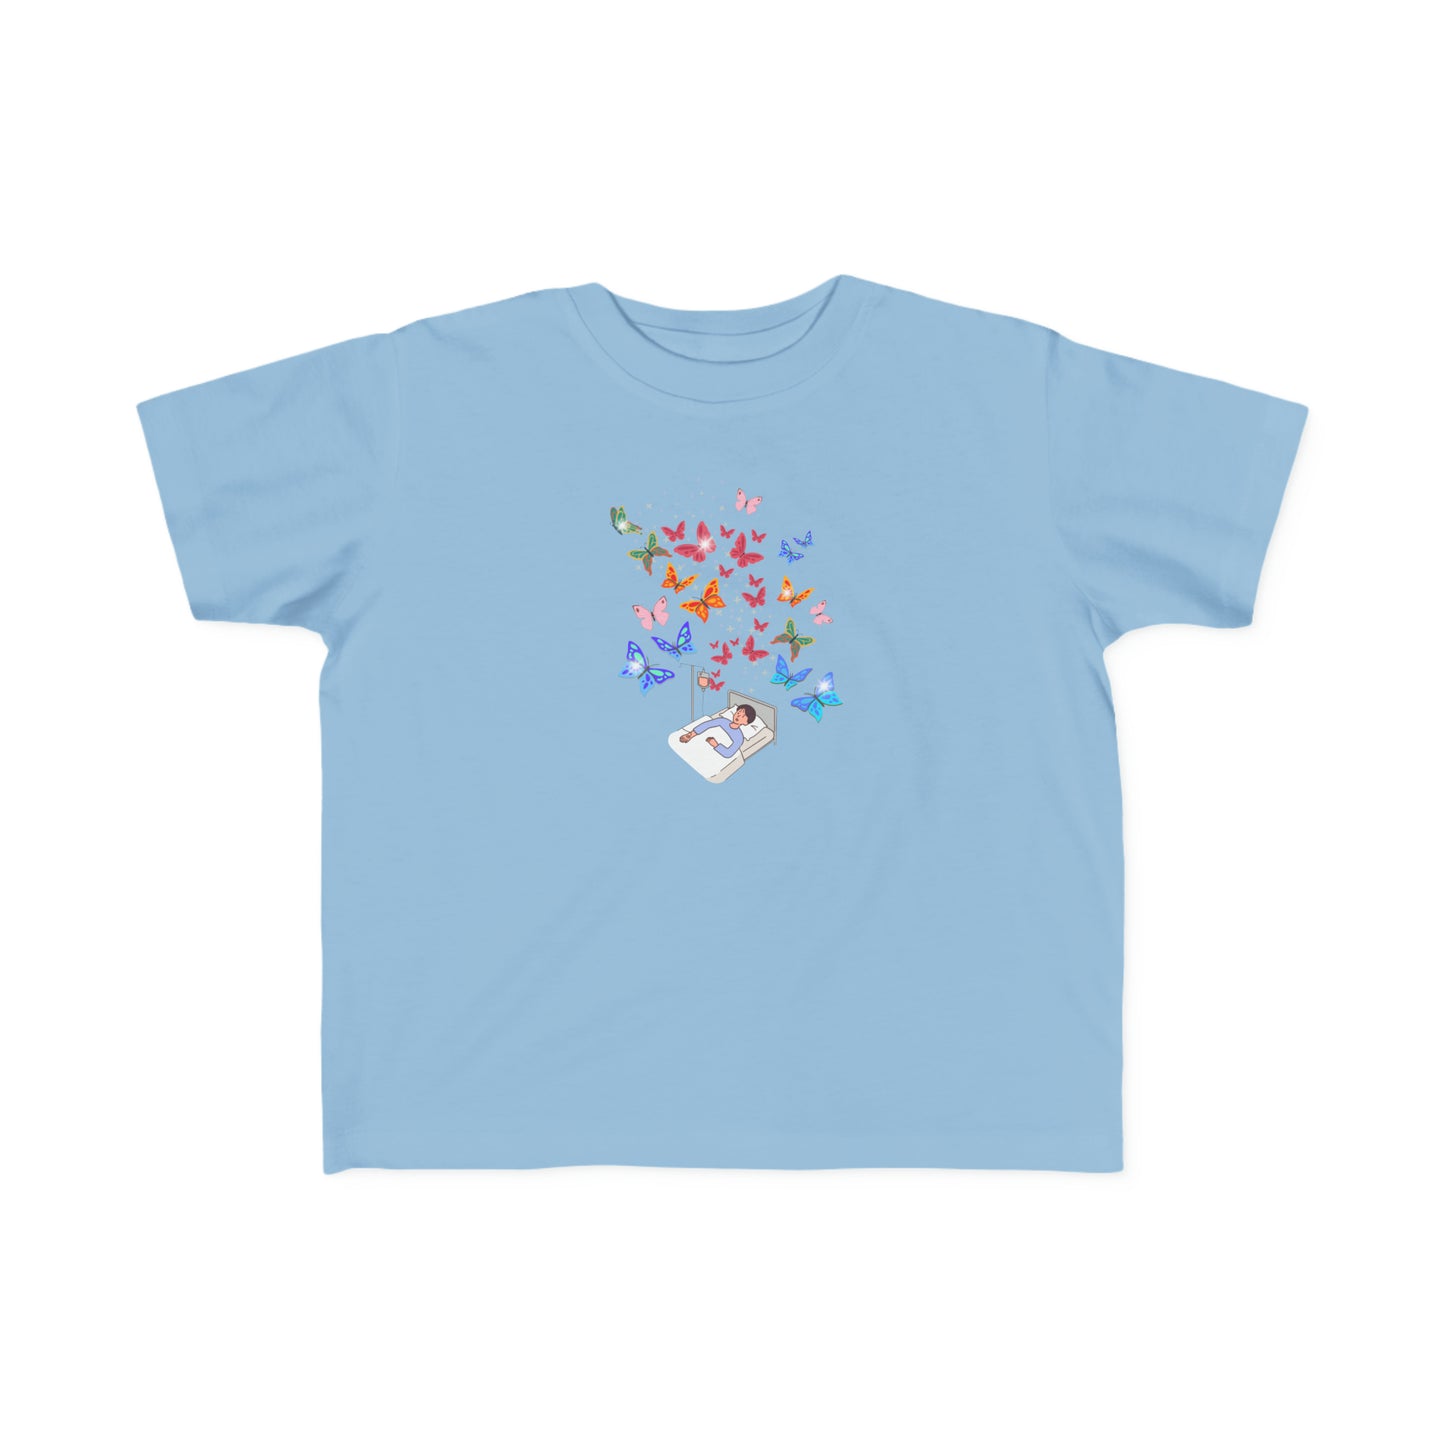 T-shirt for the benefit of the Sainte-Justine foundation - Toddler